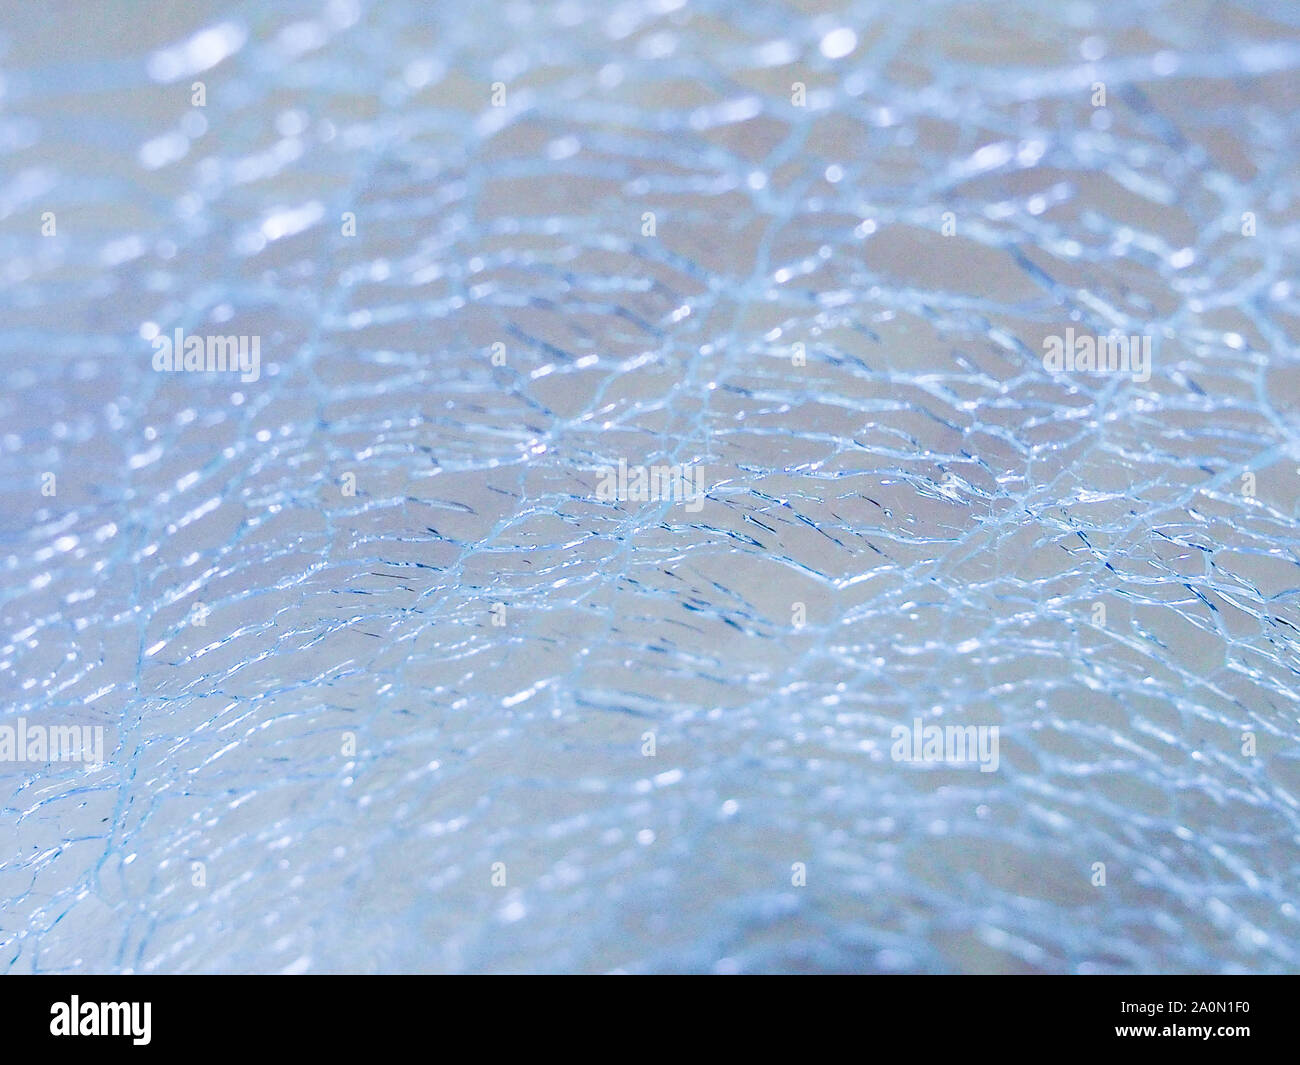 Abstract - Cracked Glass, texture small cracks on the glass Stock Photo